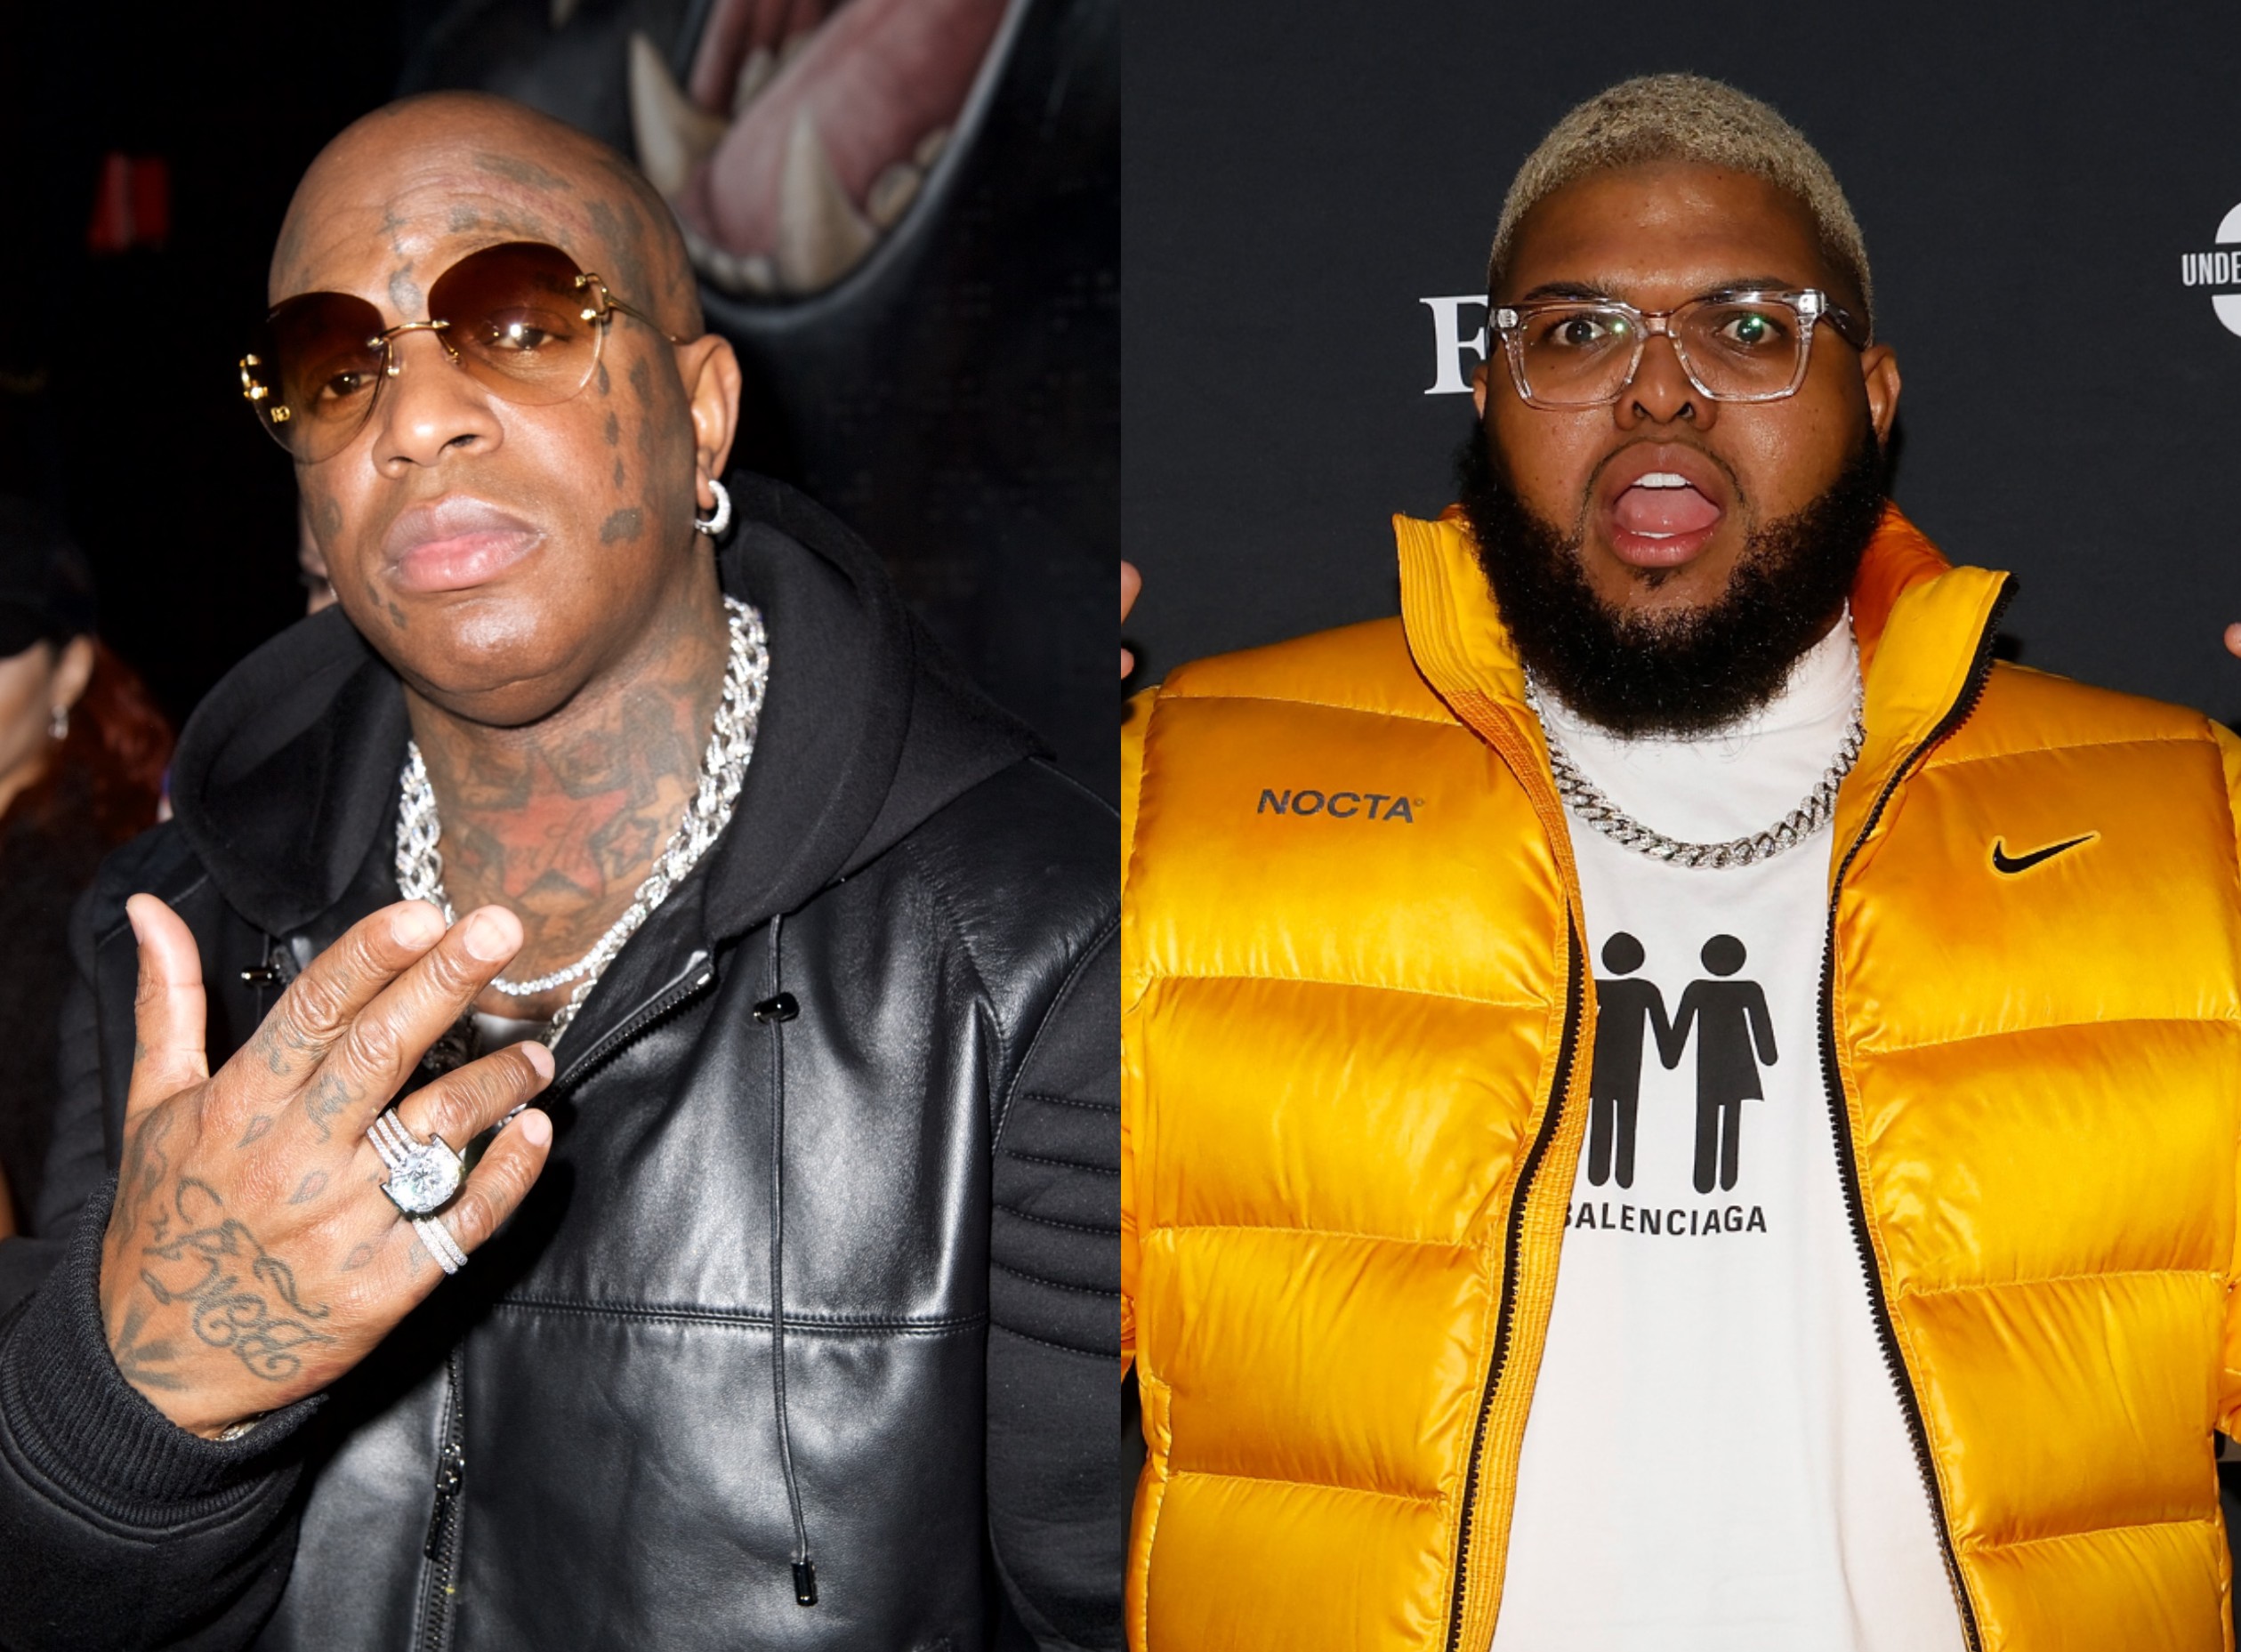 Comedy Or Caught ‘Slippin?’: Birdman Runs Up On Druski And Snatches His ‘Coulda Been Records’ Chain